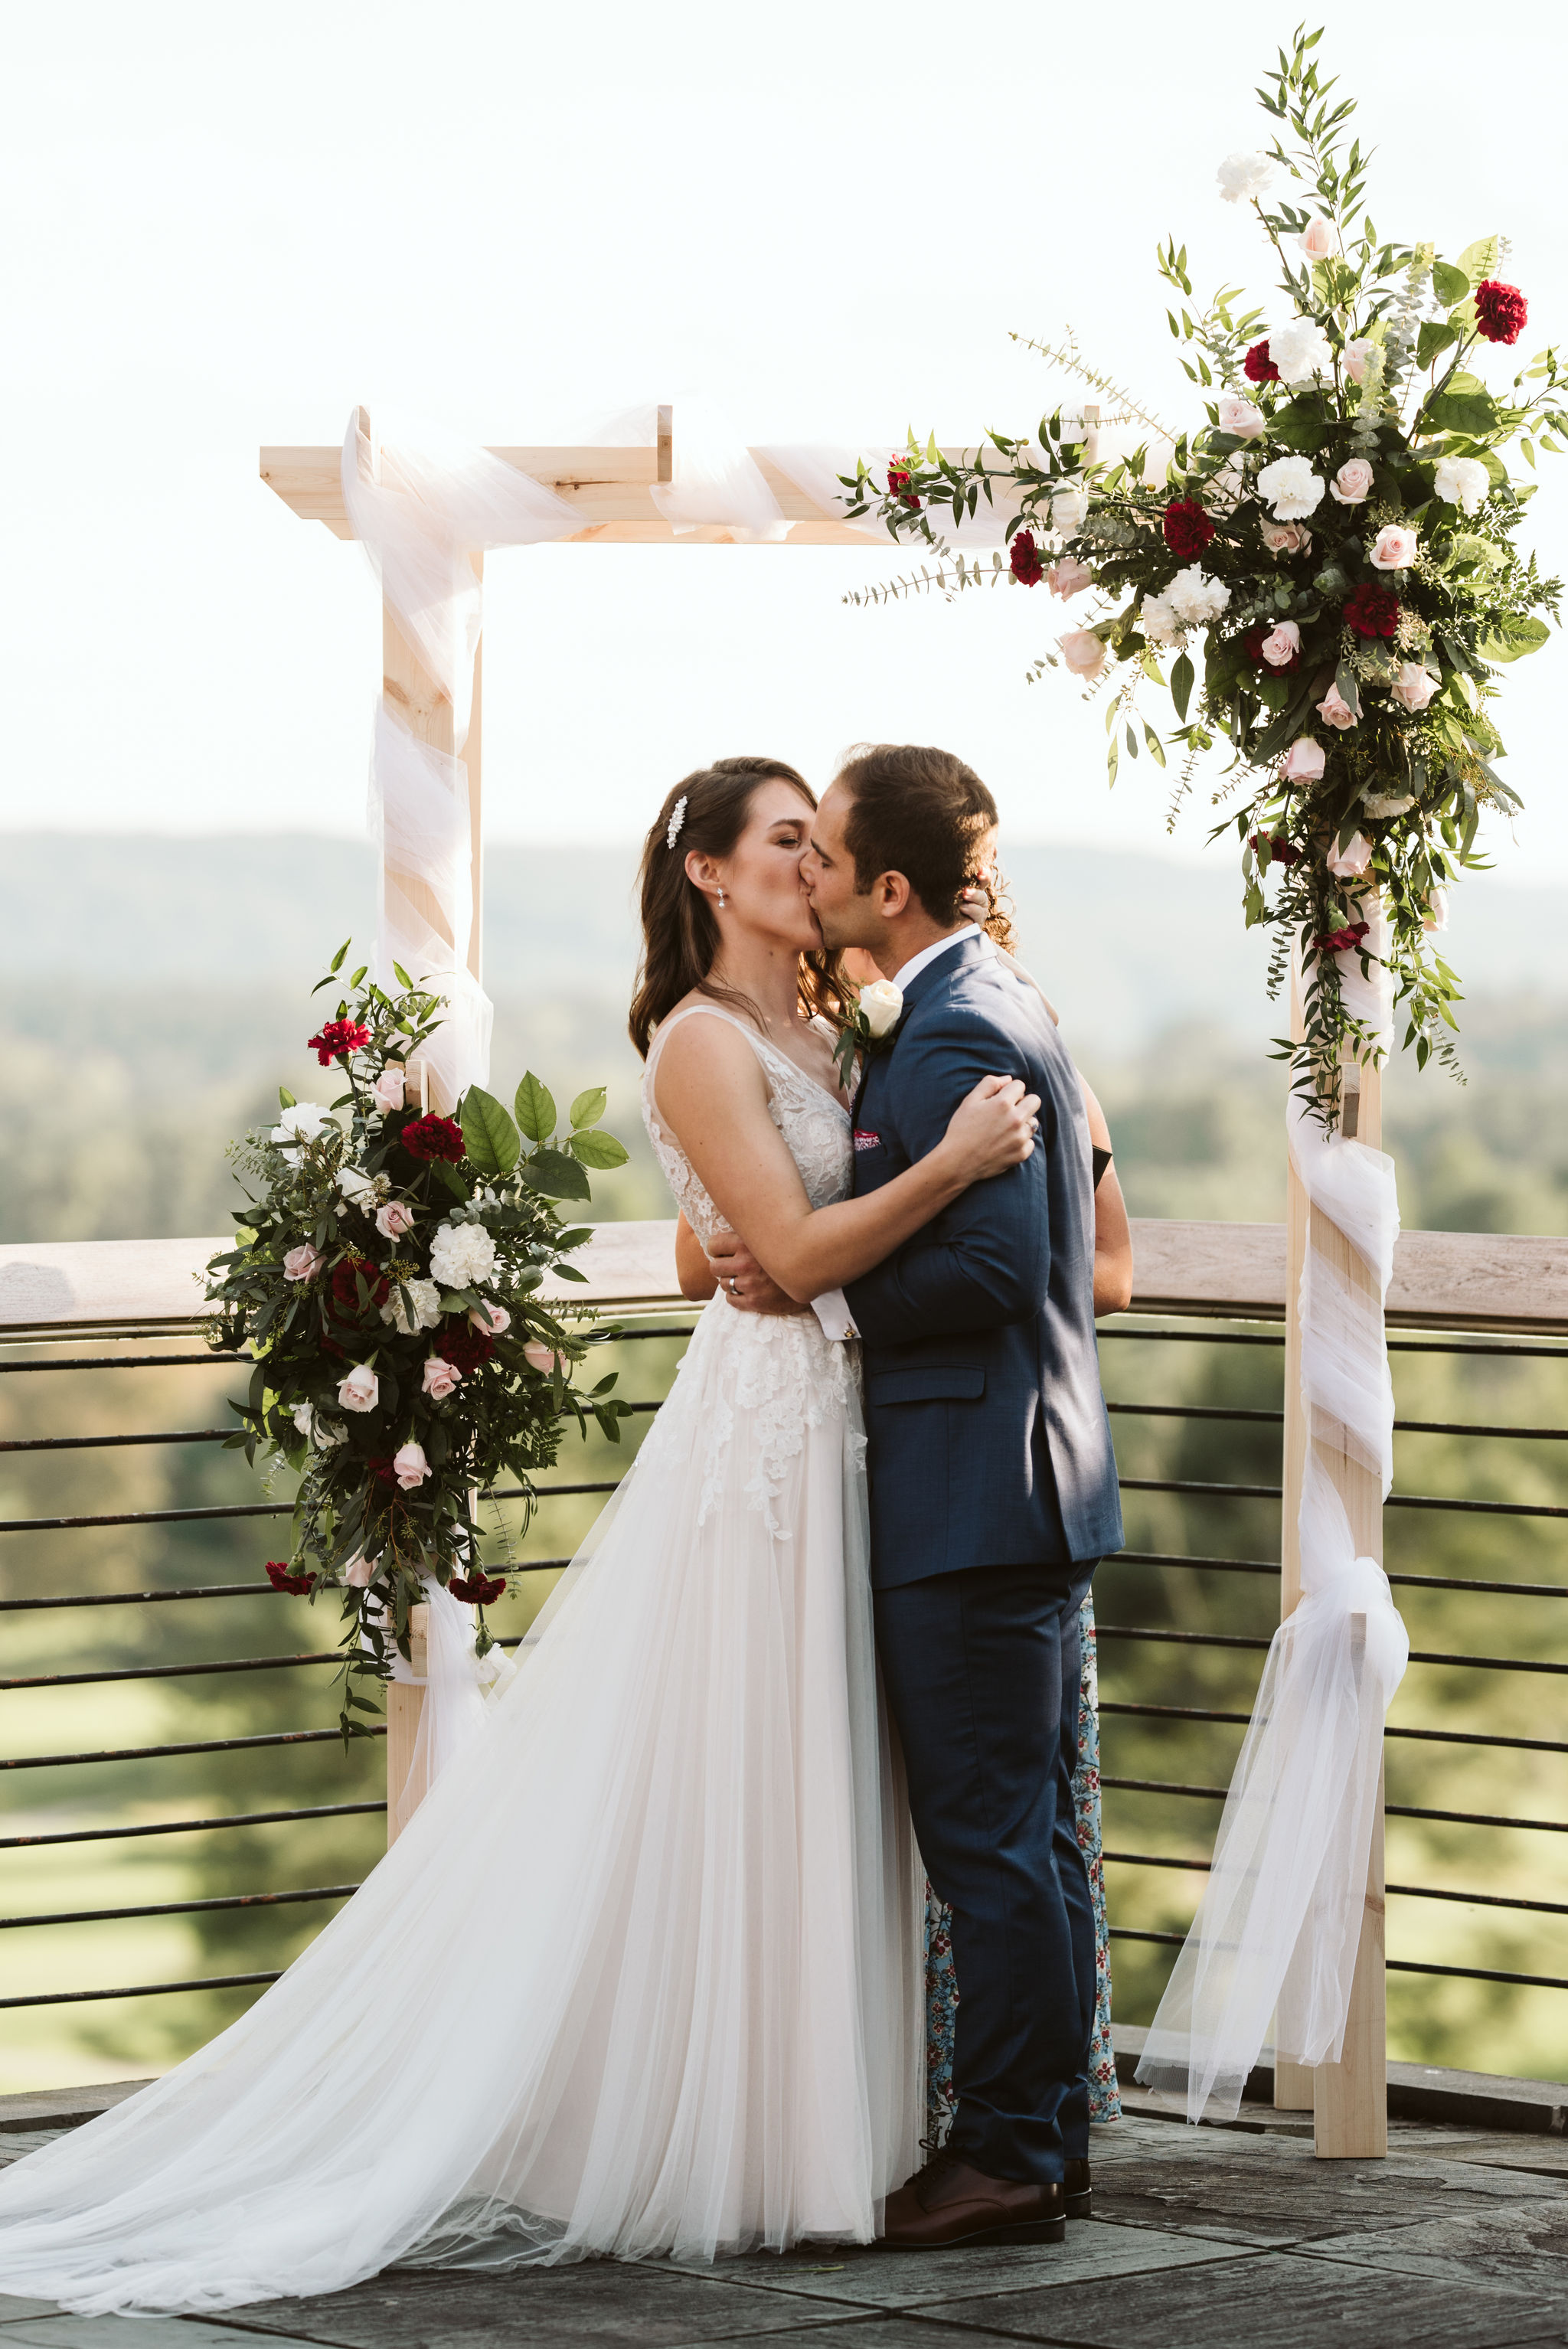  Phoenix Maryland, Baltimore Wedding Photographer, Eagle’s Nest Country Club, Classic, Romantic, Spring, Bride and Groom Share First Kiss, Just Married, Red and White Floral Arrangements, Dundalk Florist, BHLDN Dress 